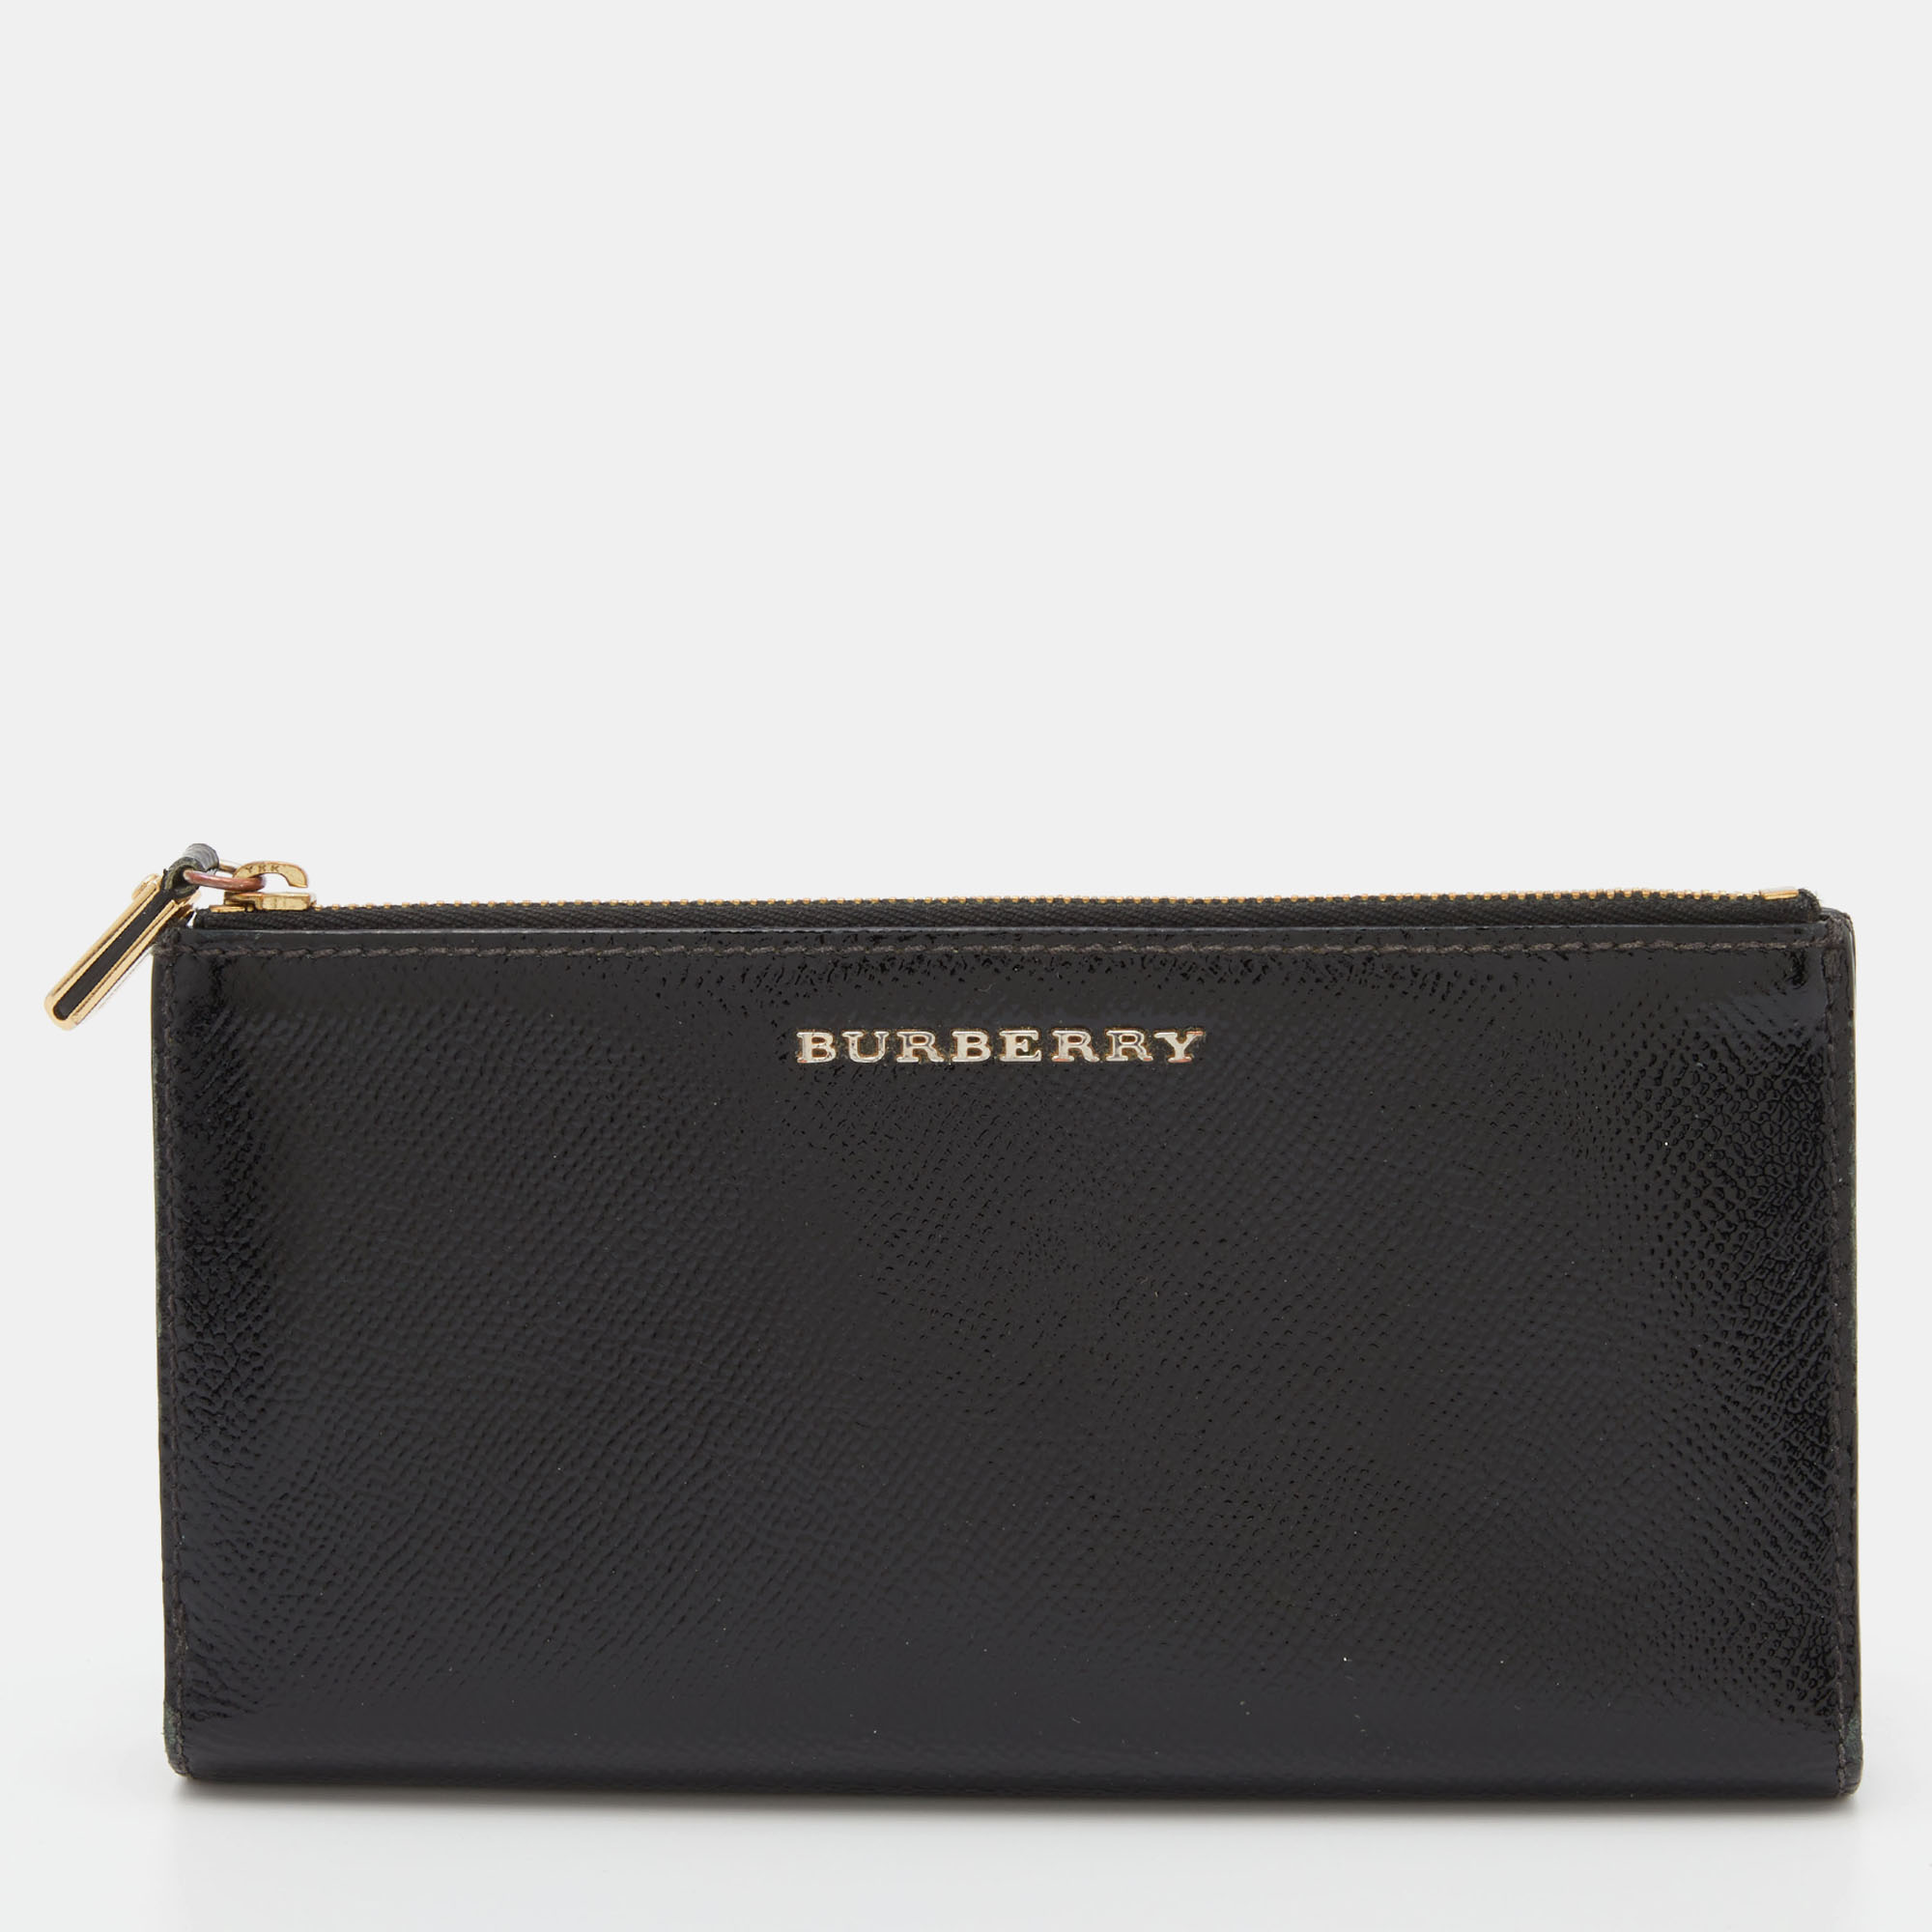 Pre-owned Burberry Black Patent Leather Long Zip Wallet